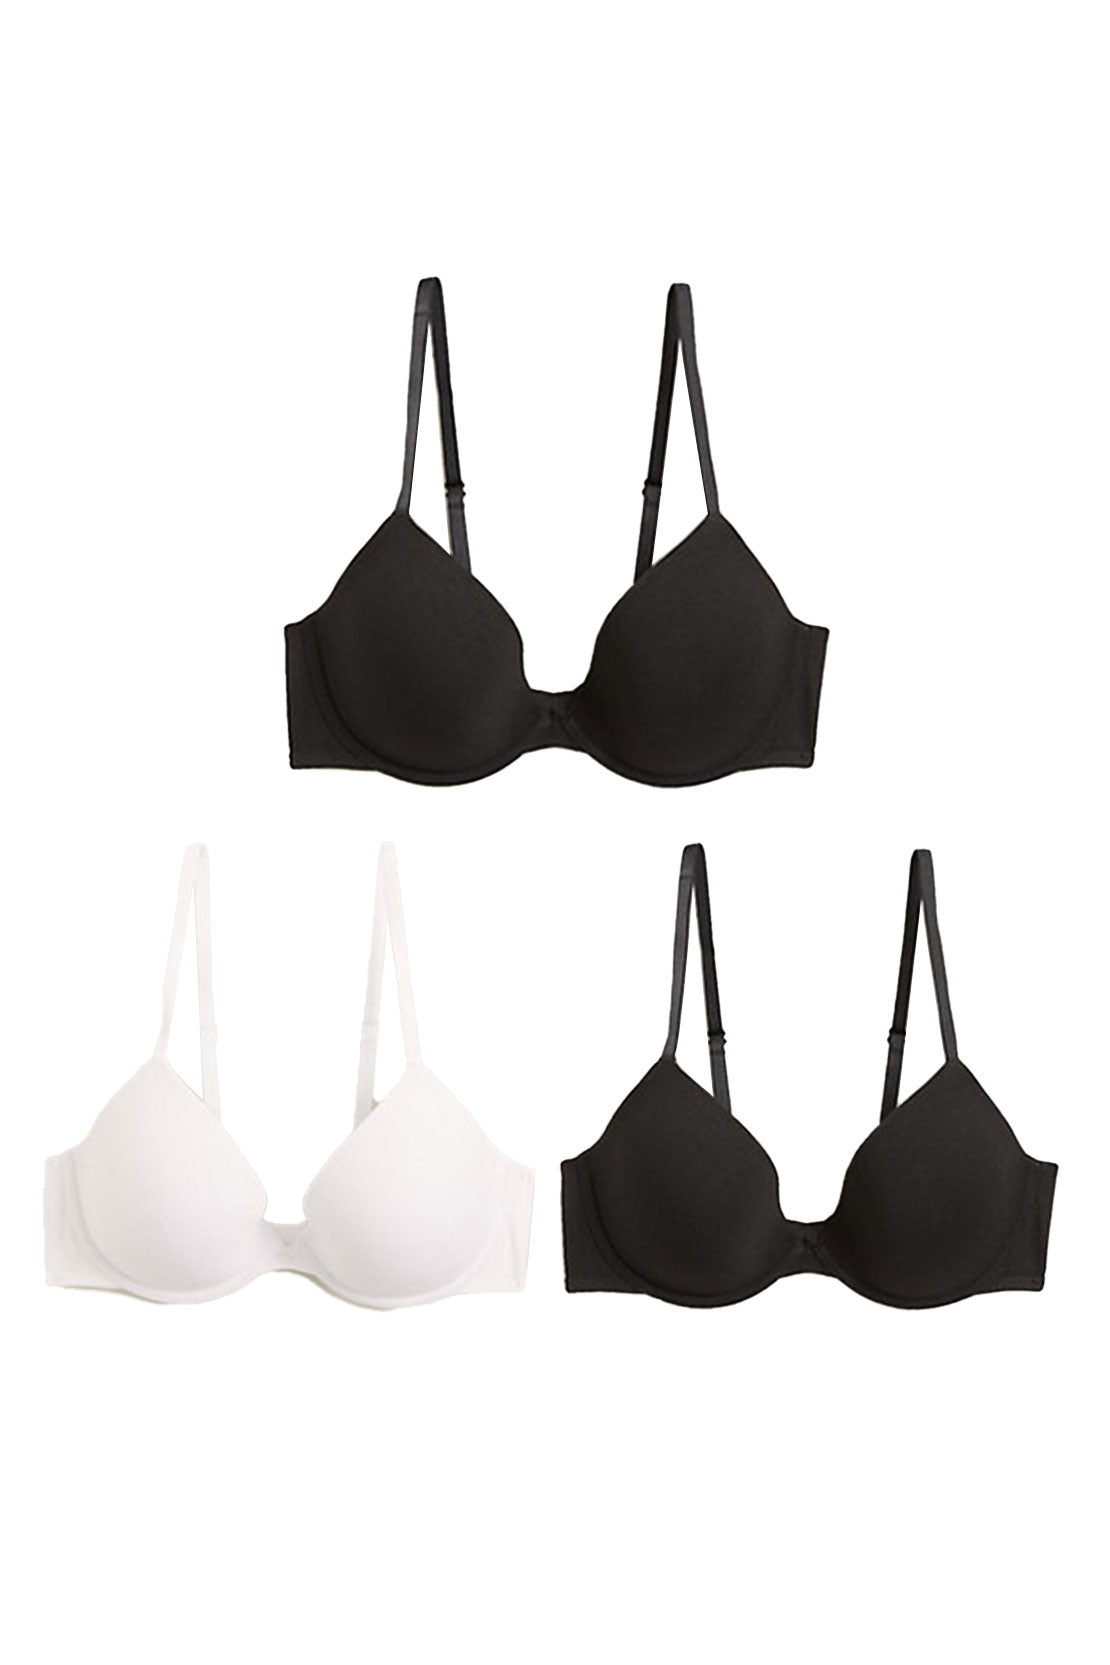 Buy Marks & Spencer Lightly Padded With Wired Bra White (Pack of 3)